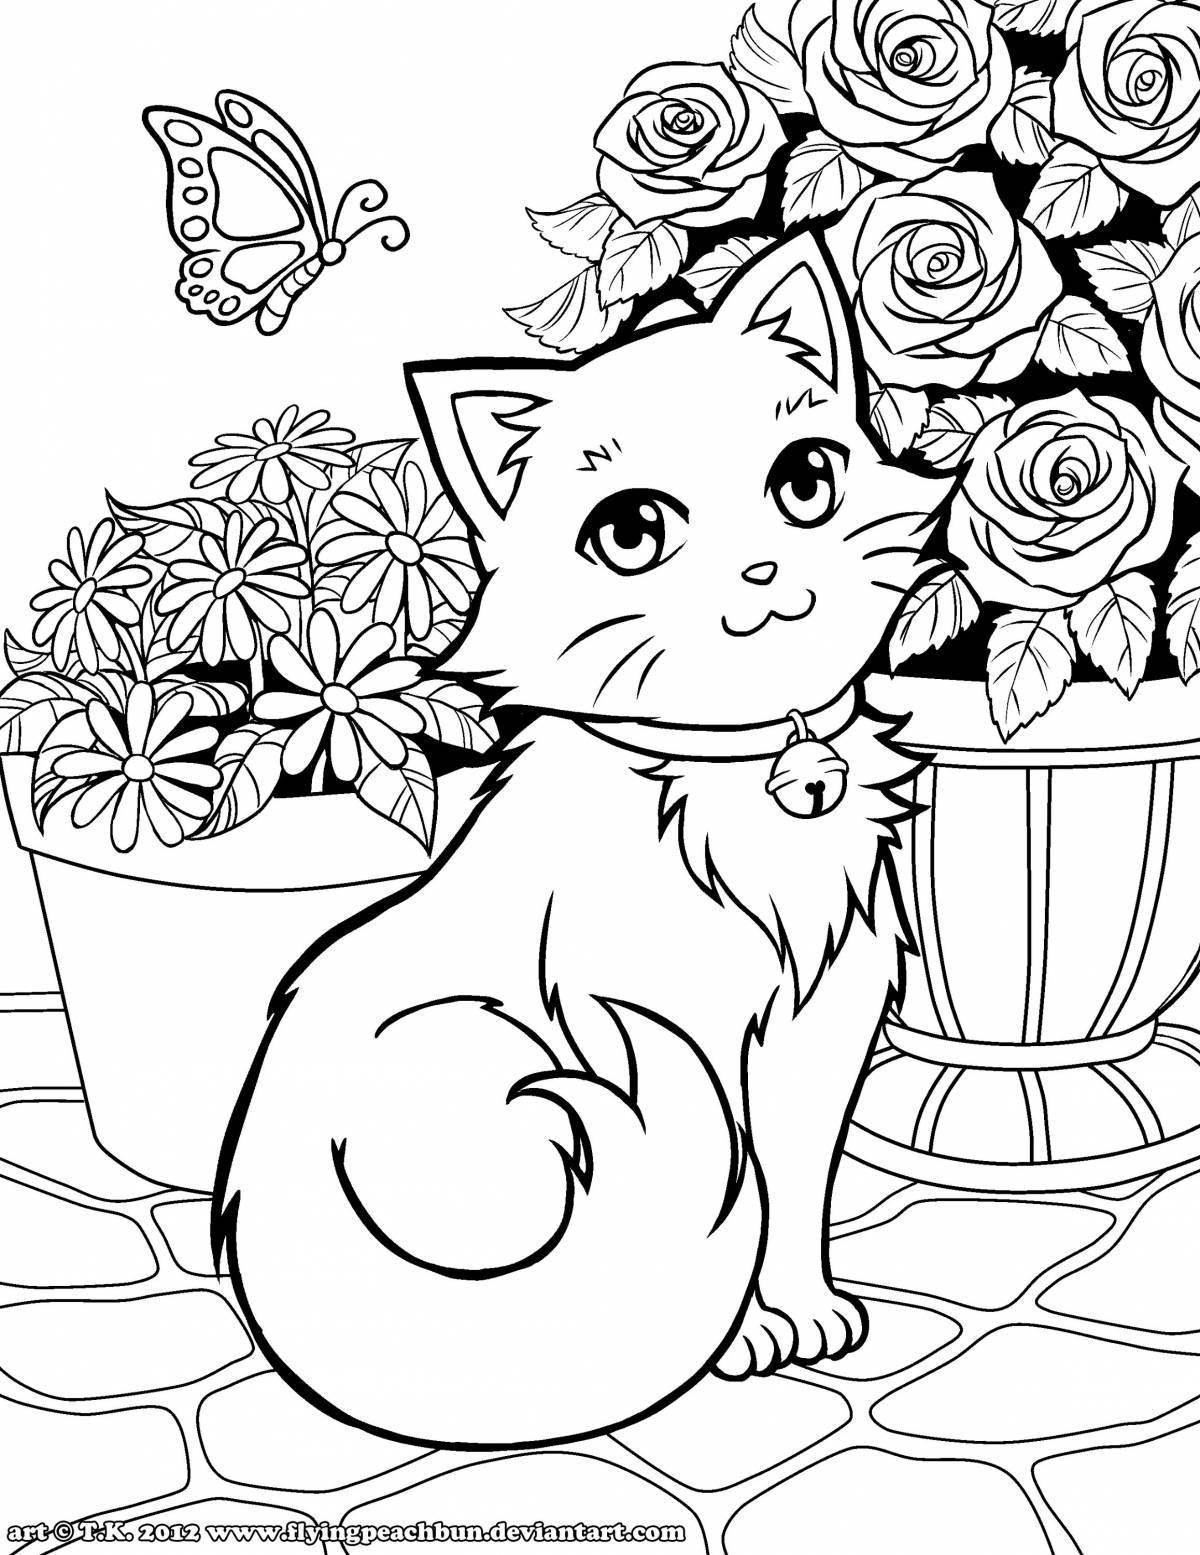 Funny coloring book for girls 7 years old with cats